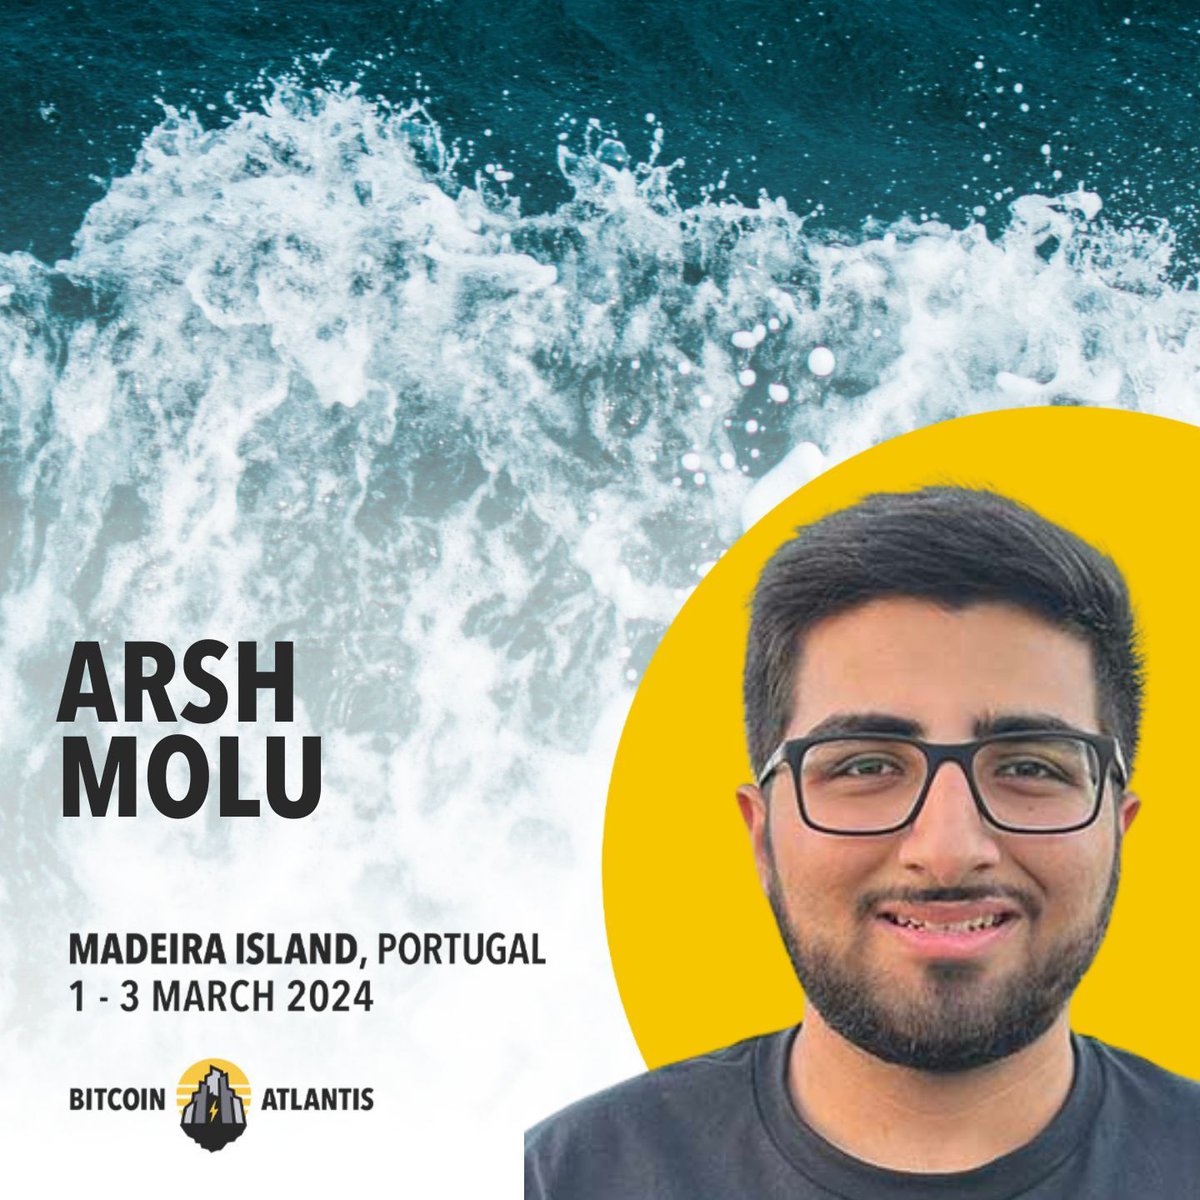 Welcome @arshmolu, a champion of financial freedom at @HRF and Co-founder of @GenBitcoiners. Thrilled to have you! 🌐 #ArshMolu #BitcoinSpeaker